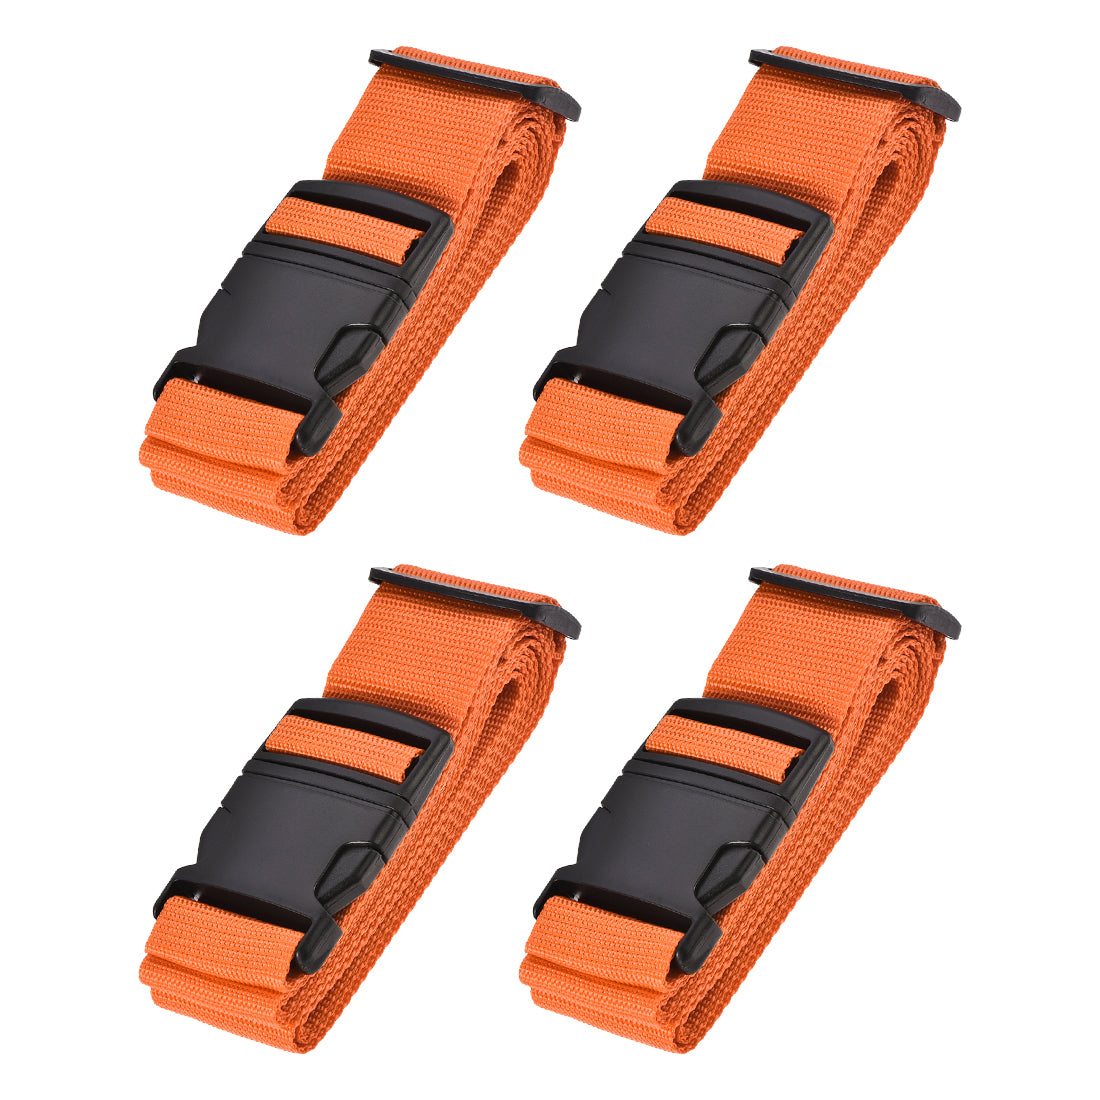 uxcell Uxcell Luggage Straps Suitcase Belts with Buckle Label, 2Mx5cm Adjustable PP Travel Bag Packing Accessories, Orange 4Pcs